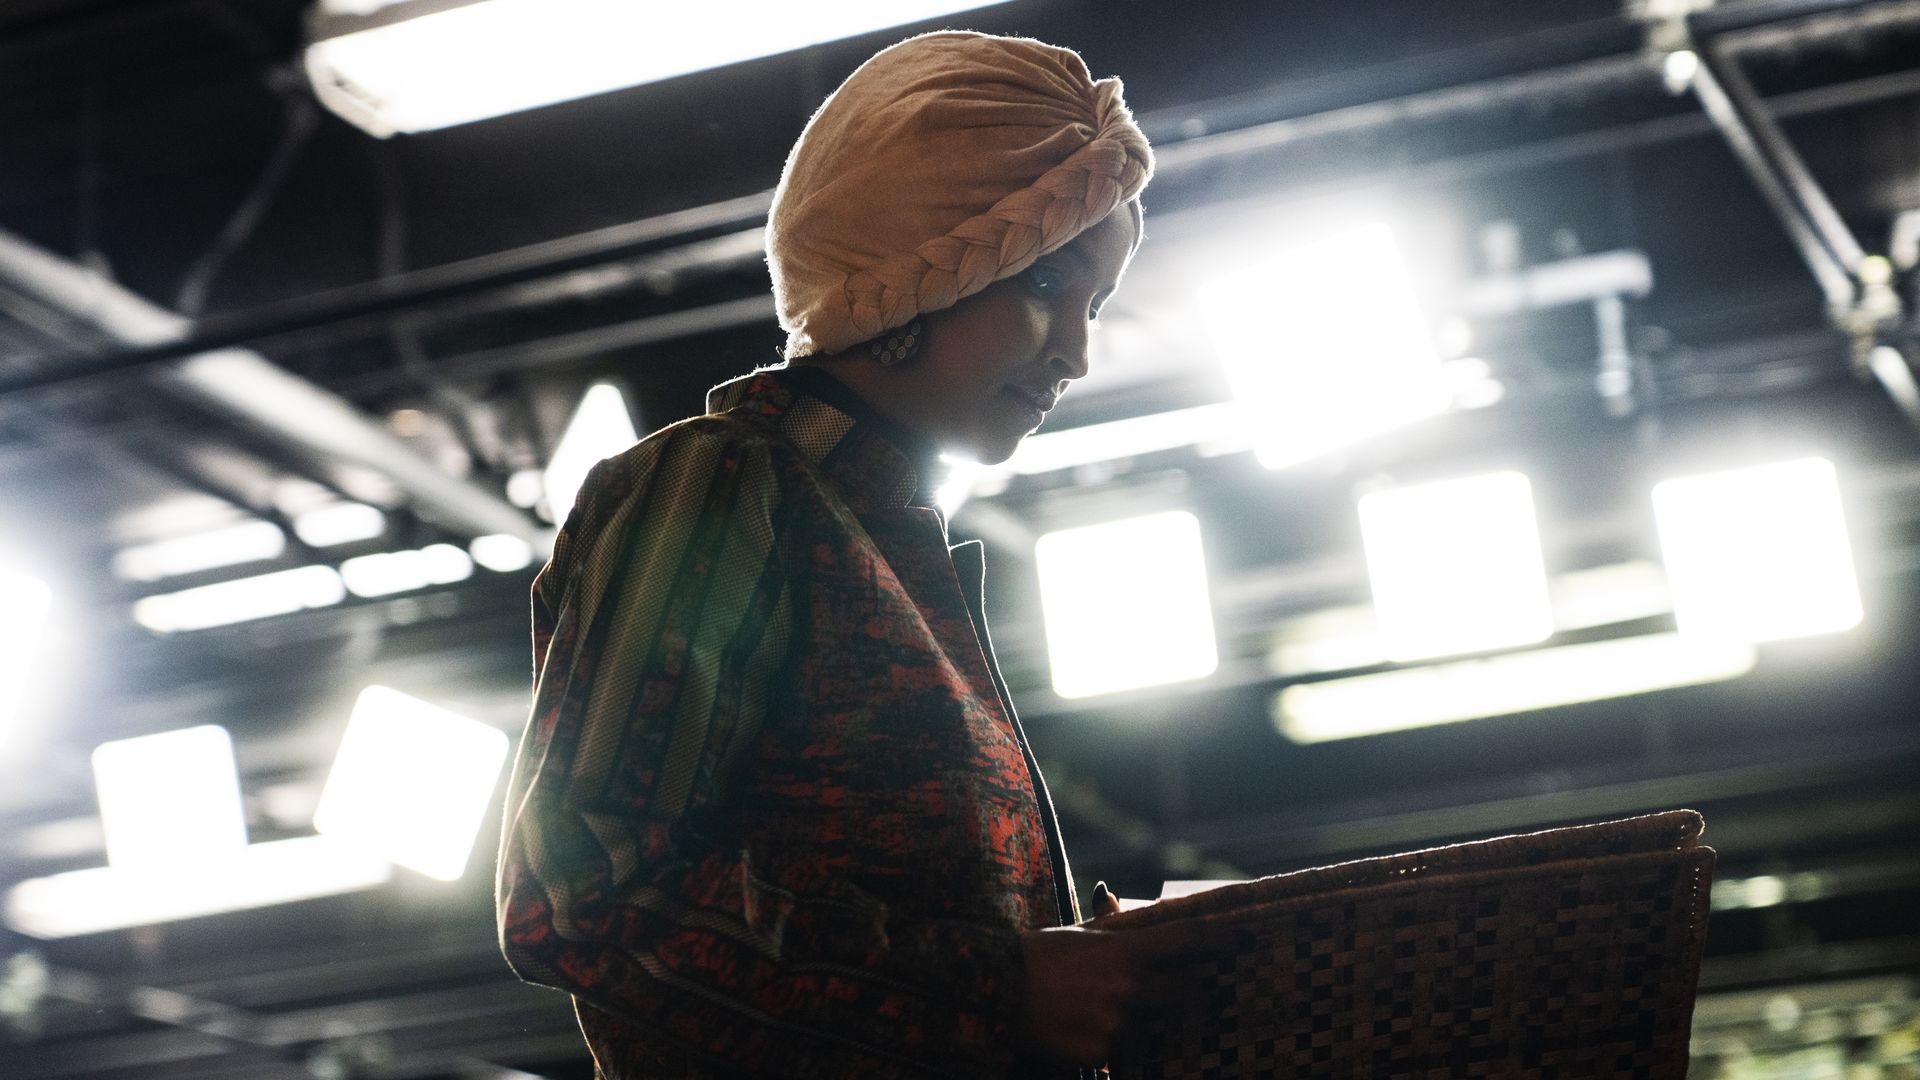 Rep. Ilhan Omar, wearing a peach-colored headscarf, looks at a binder while standing under studio lights.